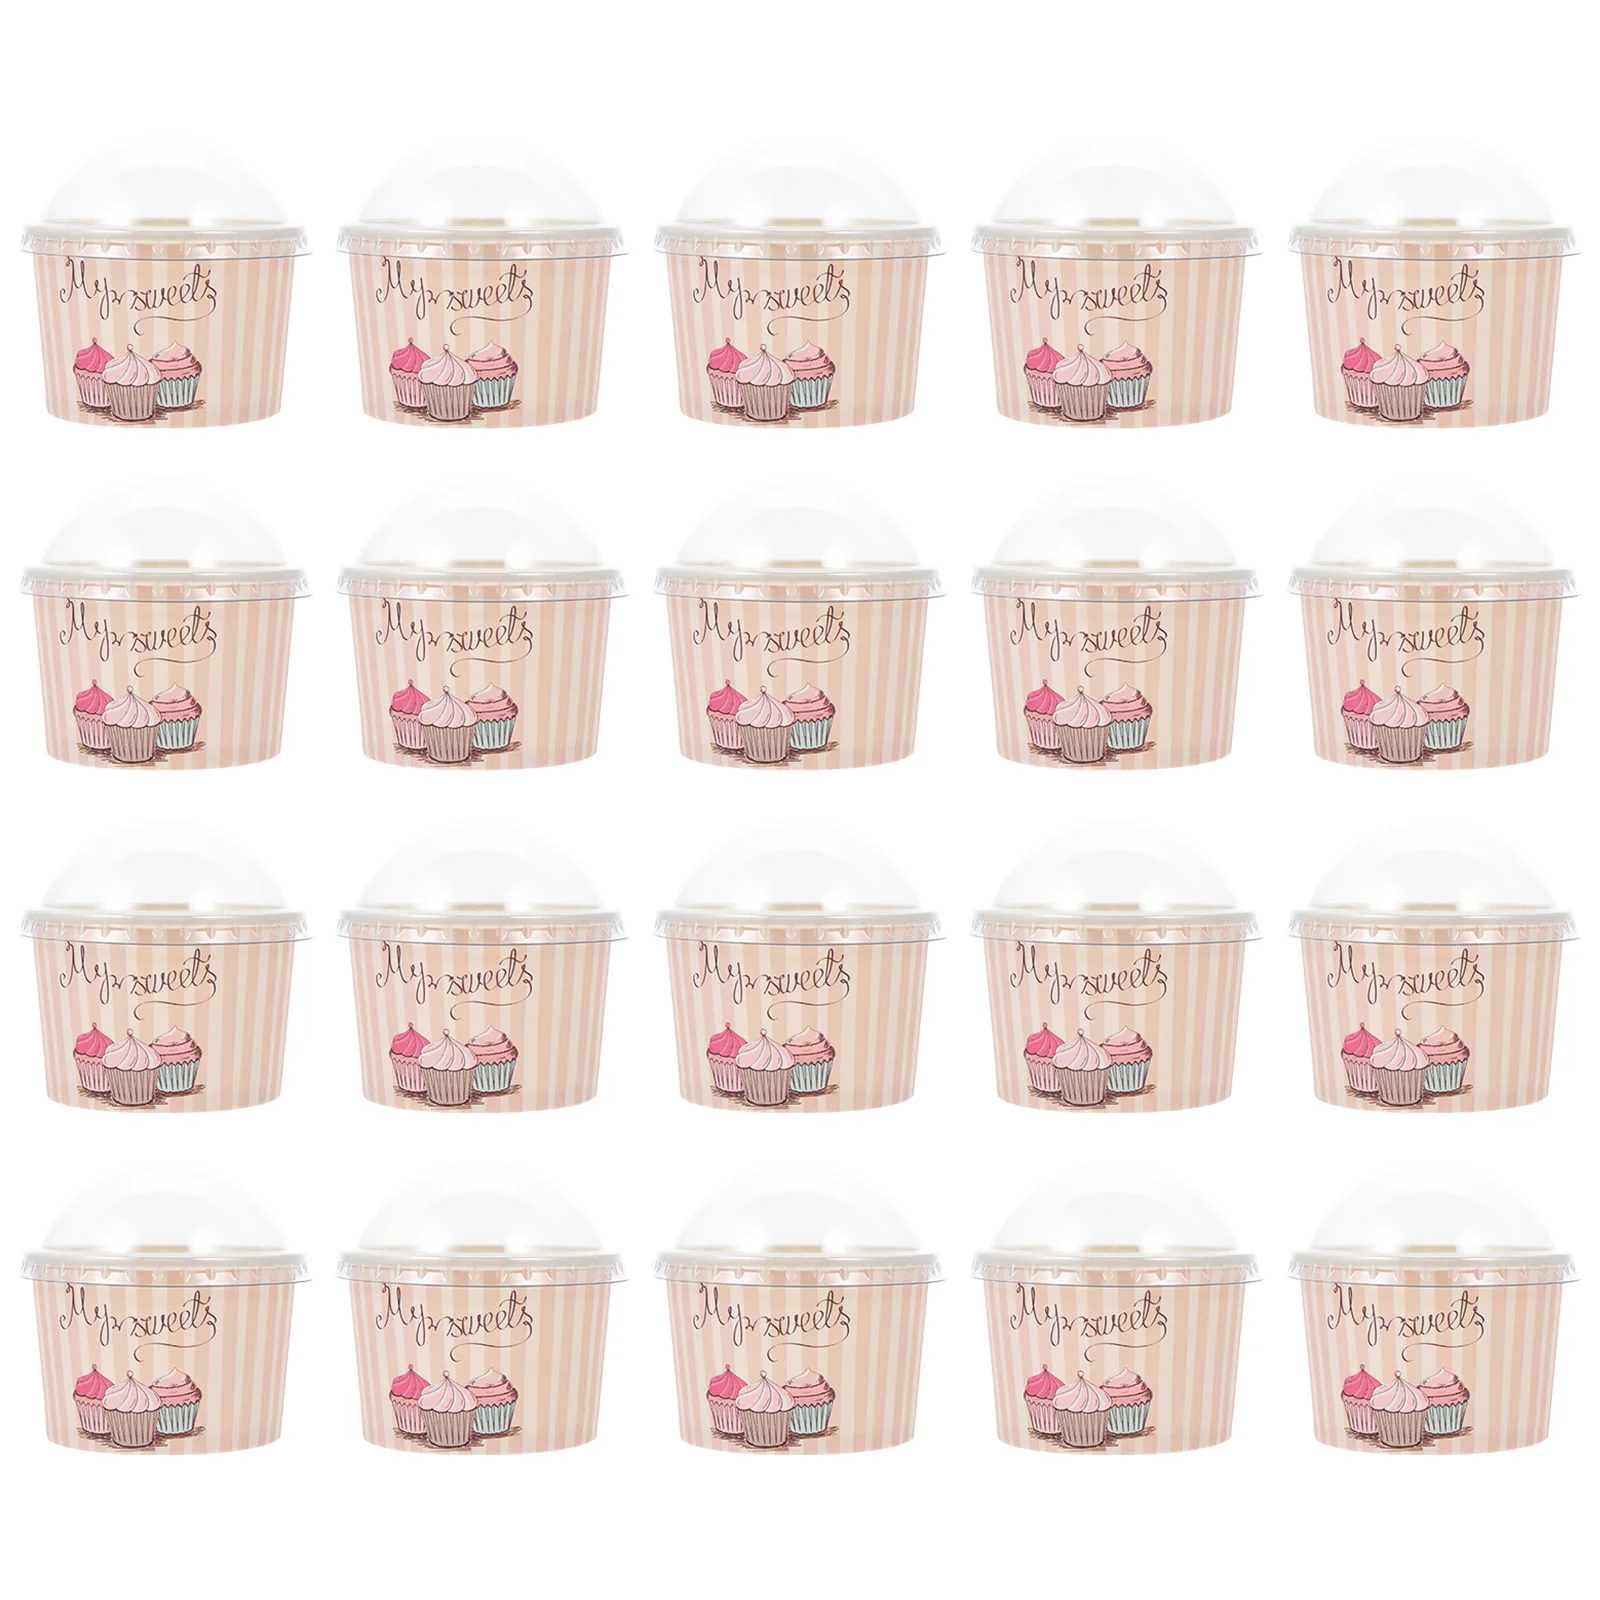 

Paper Cup Cups Ice Cream Dessert Yogurt Bowl Bowls Cake Sundae Disposable Container Pudding Treat Lids Lid Containers Party Food